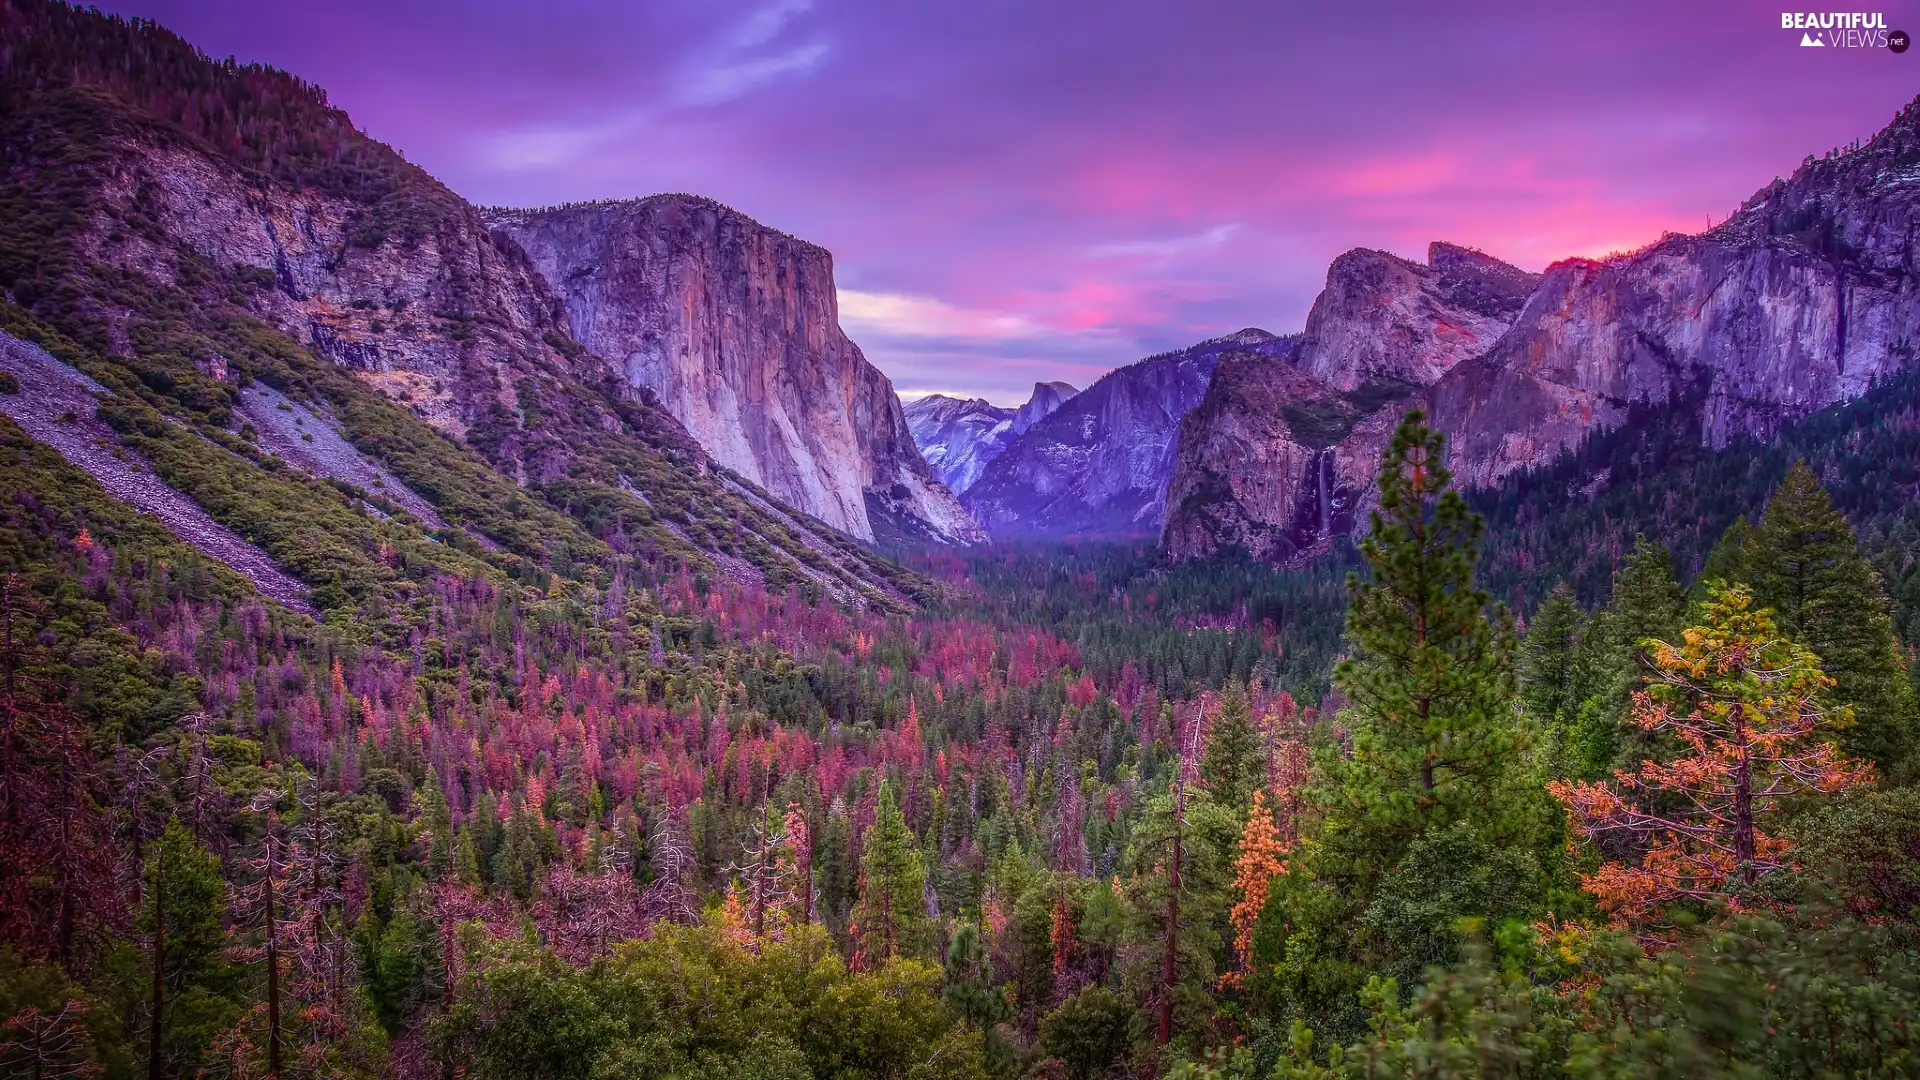 Yosemite National Park, Yosemite Valley, autumn, Mountains, State of California, The United States, viewes, woods, trees